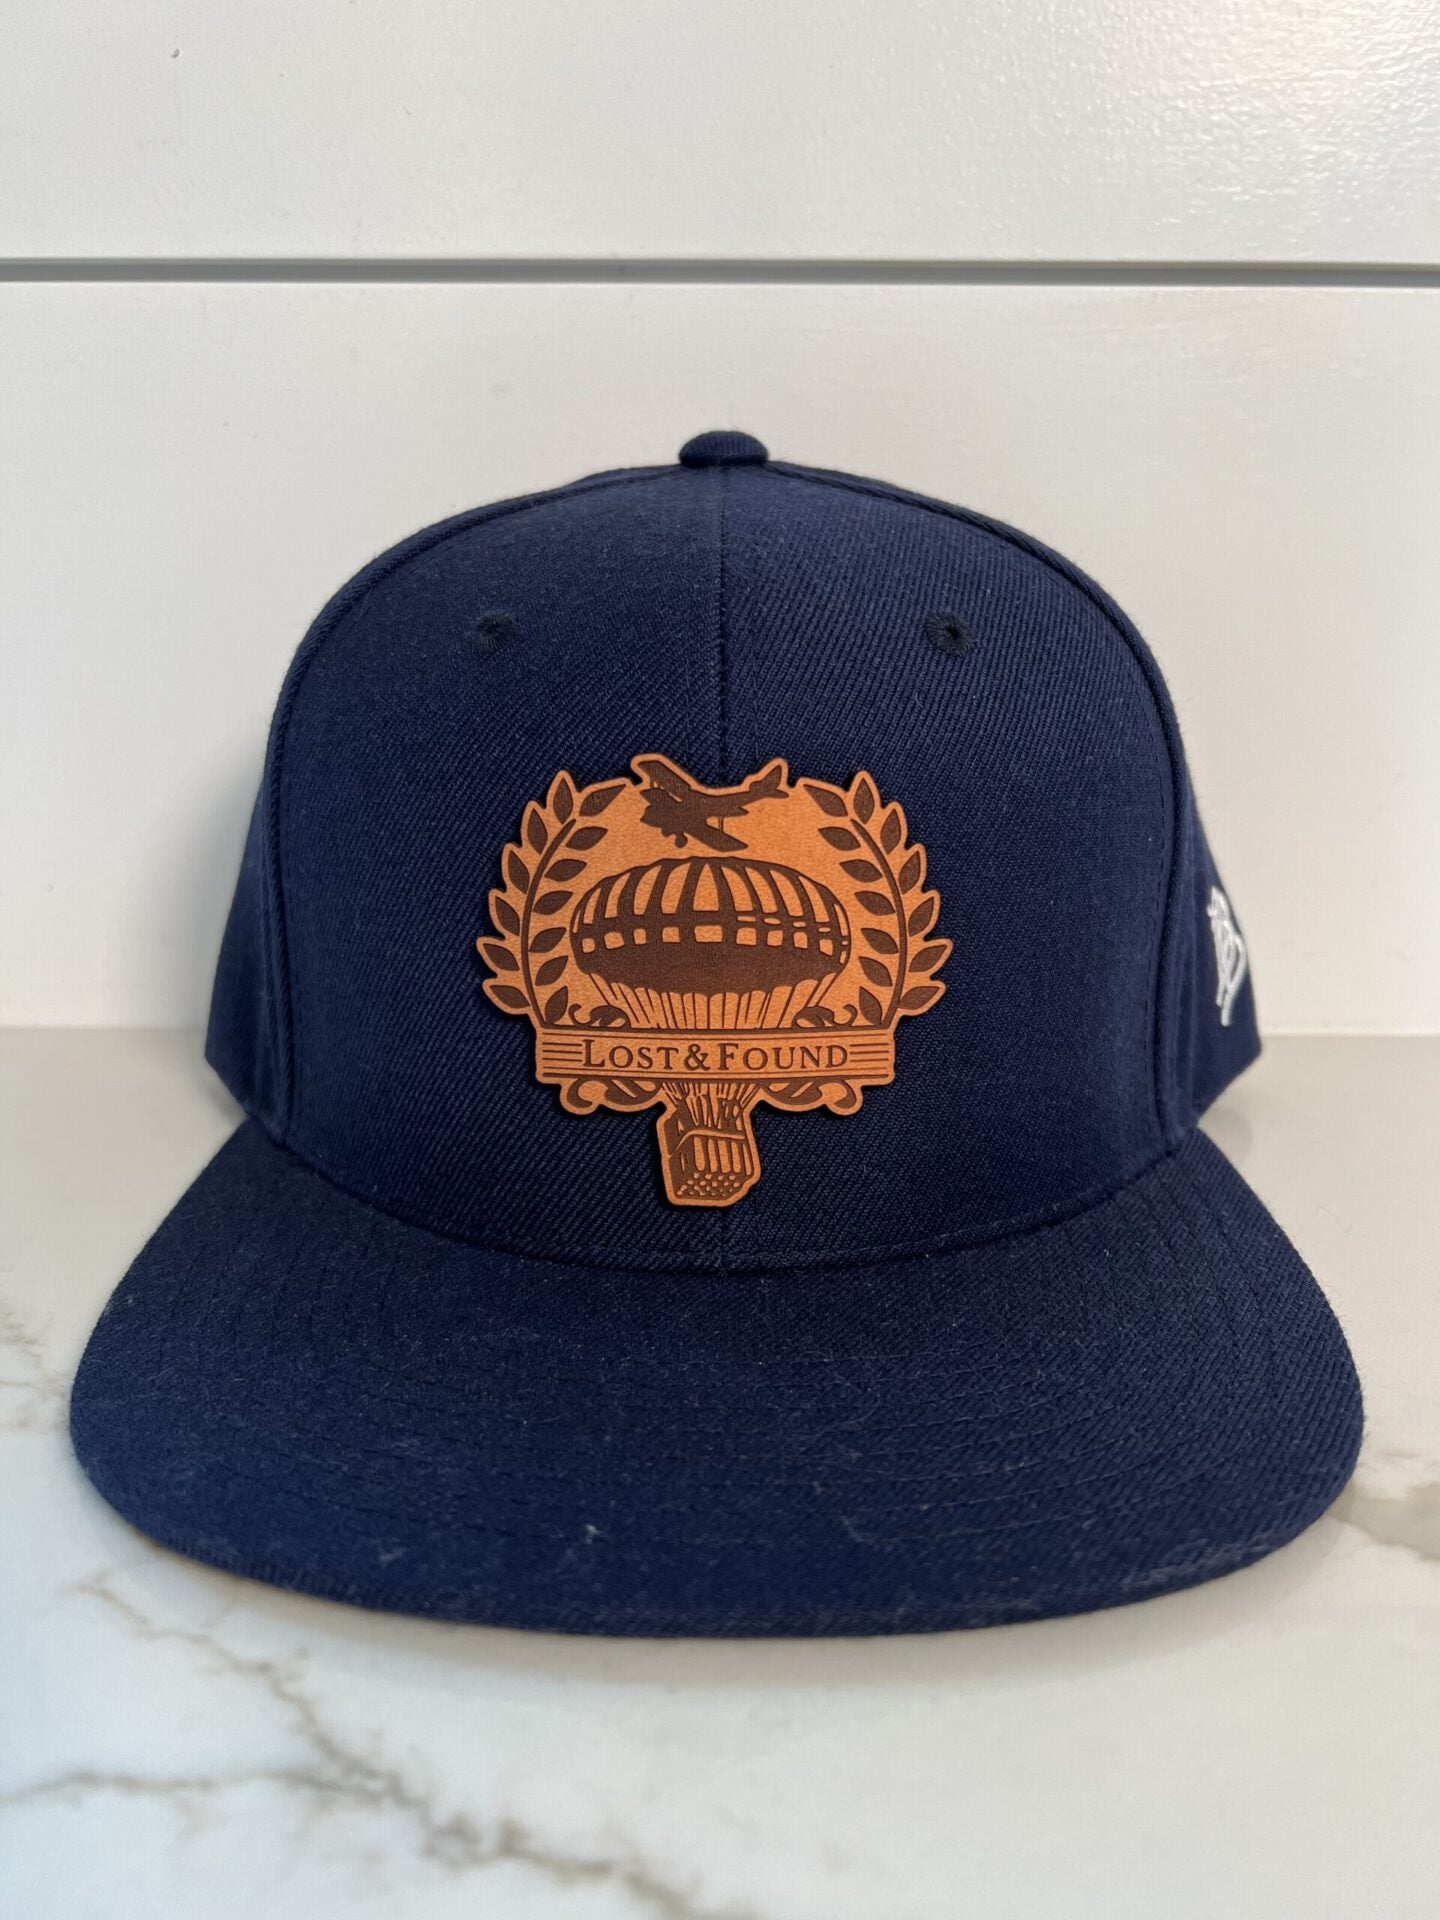 Lost & Found Blue Snapback cigars supplied by Sir Louis Cigars